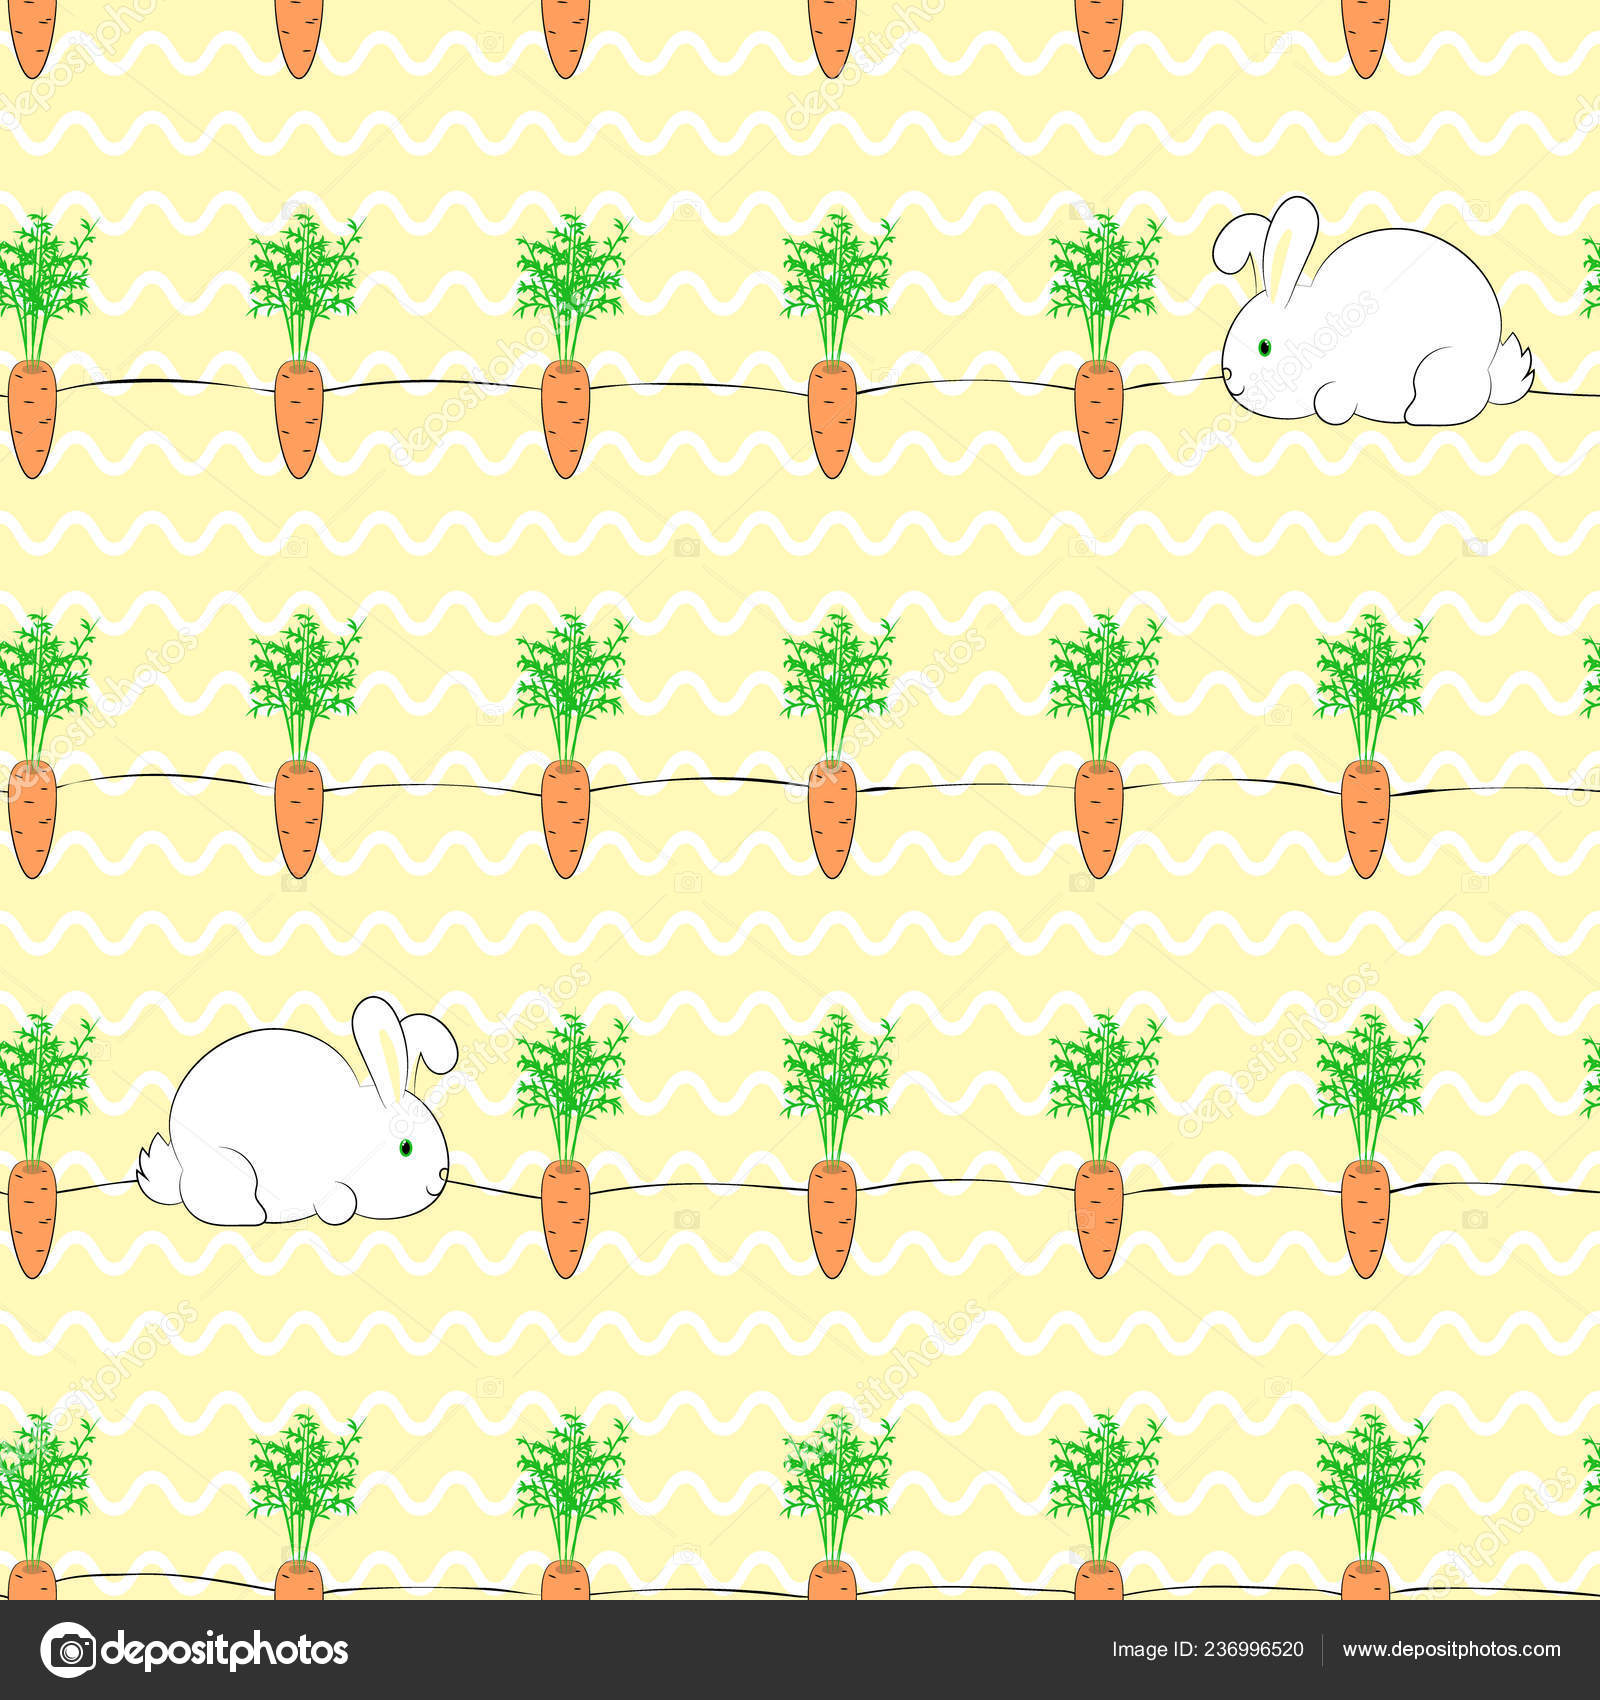 Cute Pattern With Many Carrots And Rabbits On The Yellow - Illustration , HD Wallpaper & Backgrounds